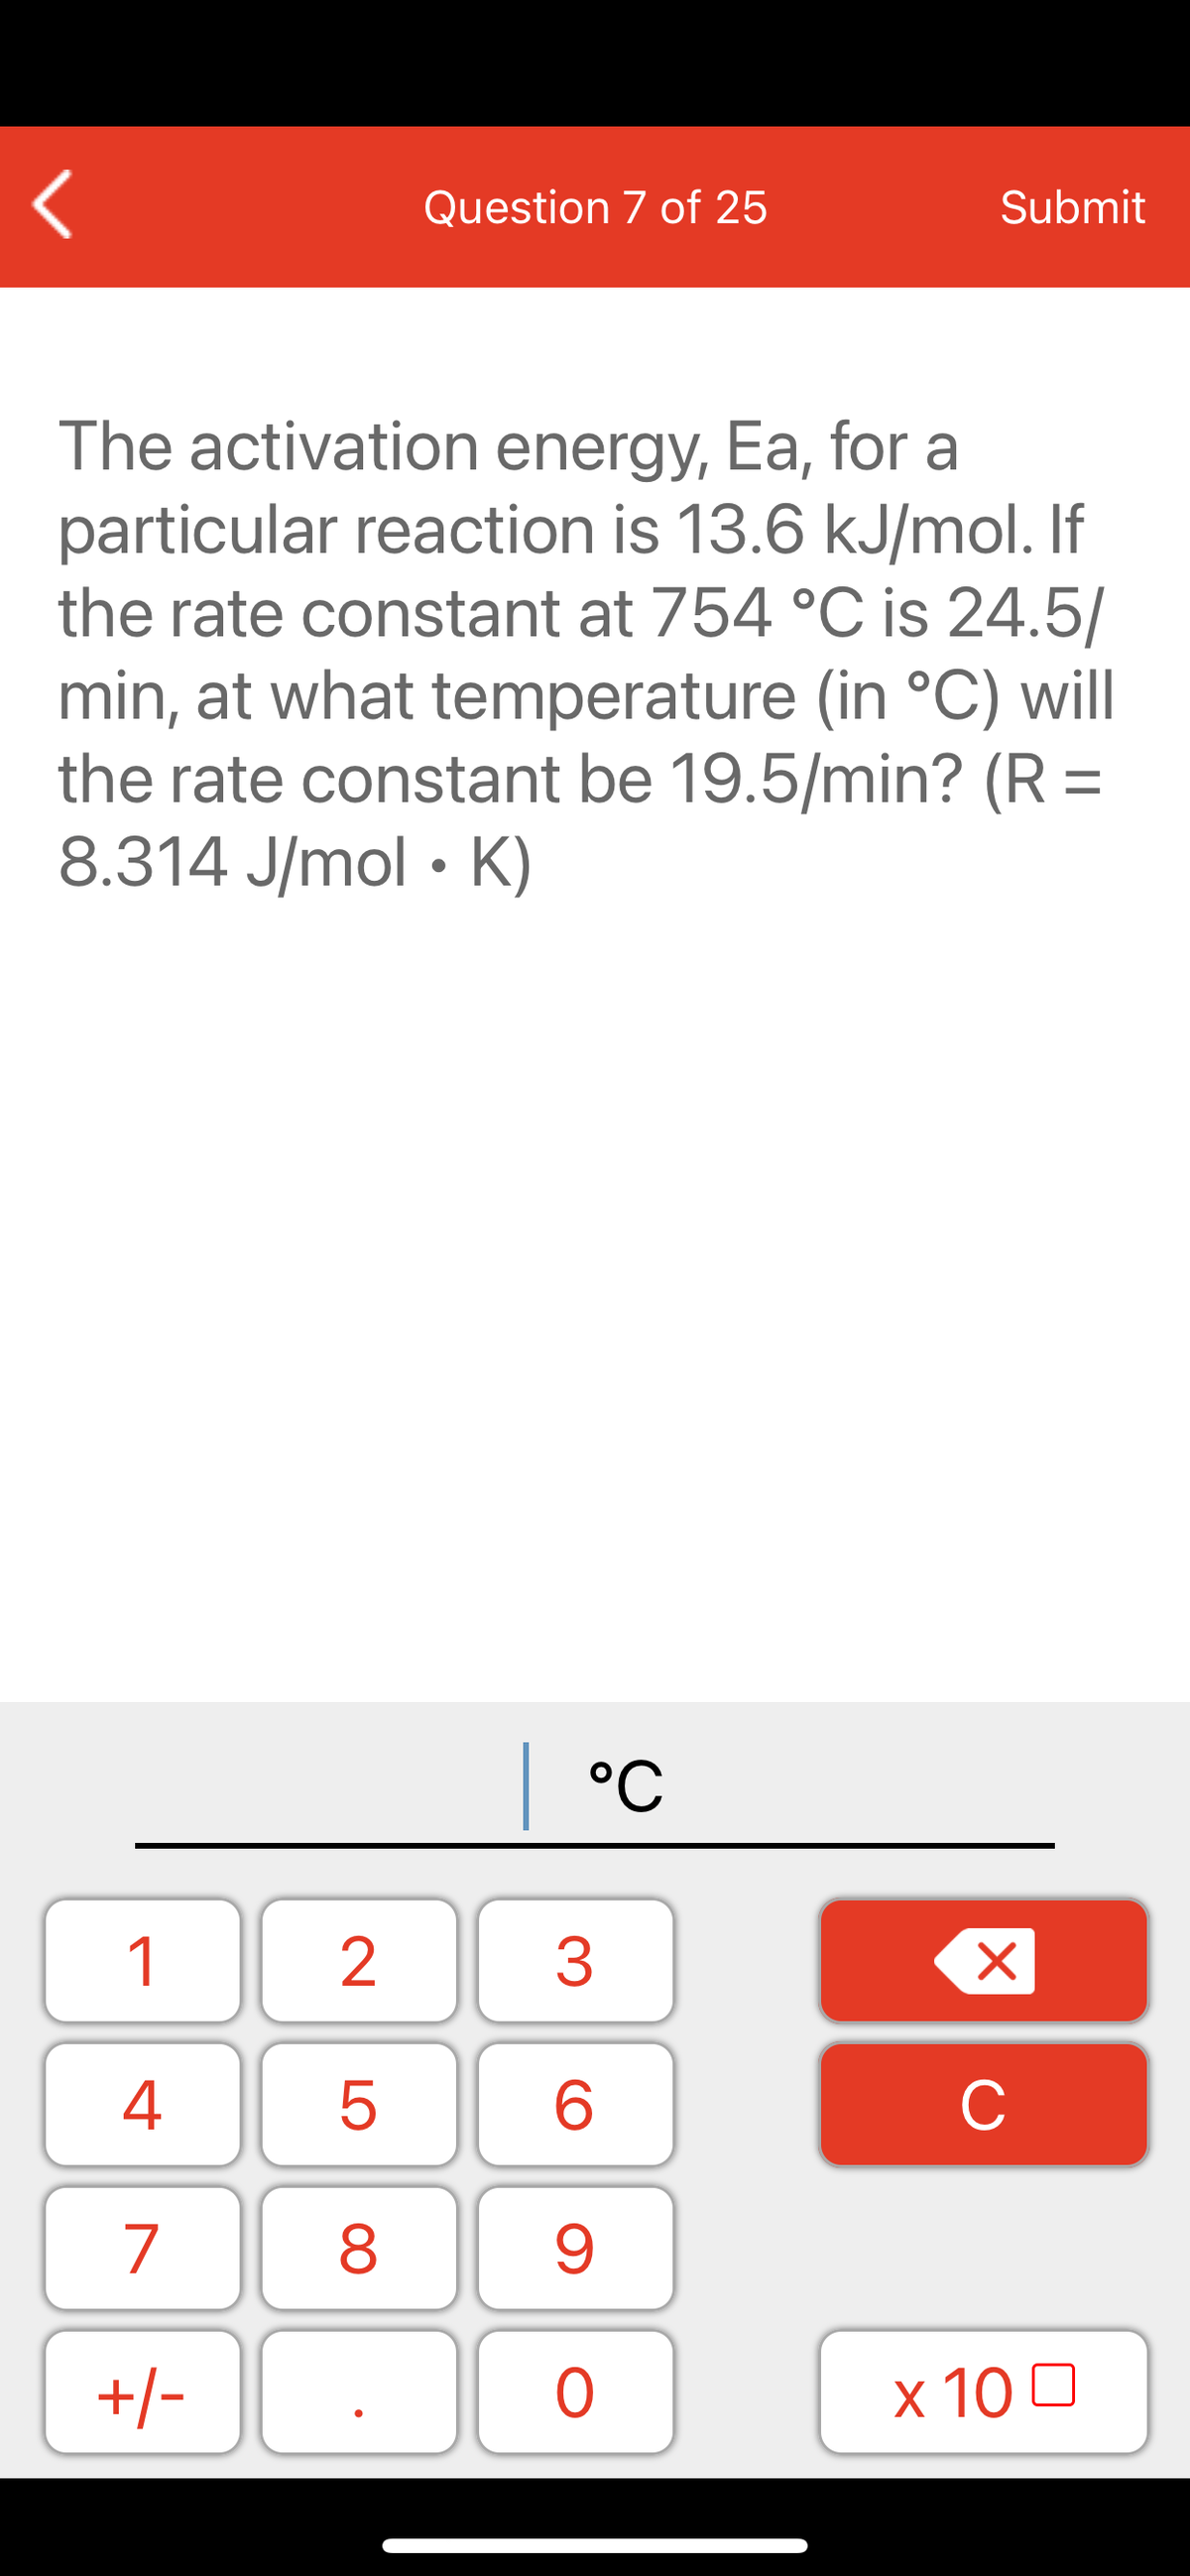 Question 7 of 25
Submit
The activation energy, Ea, for a
particular reaction is 13.6 kJ/mol. If
the rate constant at 754 °C is 24.5/
min, at what temperature (in °C) will
the rate constant be 19.5/min? (R =
8.314 J/mol • K)
| °C
1
2
3
C
7
9.
+/-
x 10 0
LO
00
